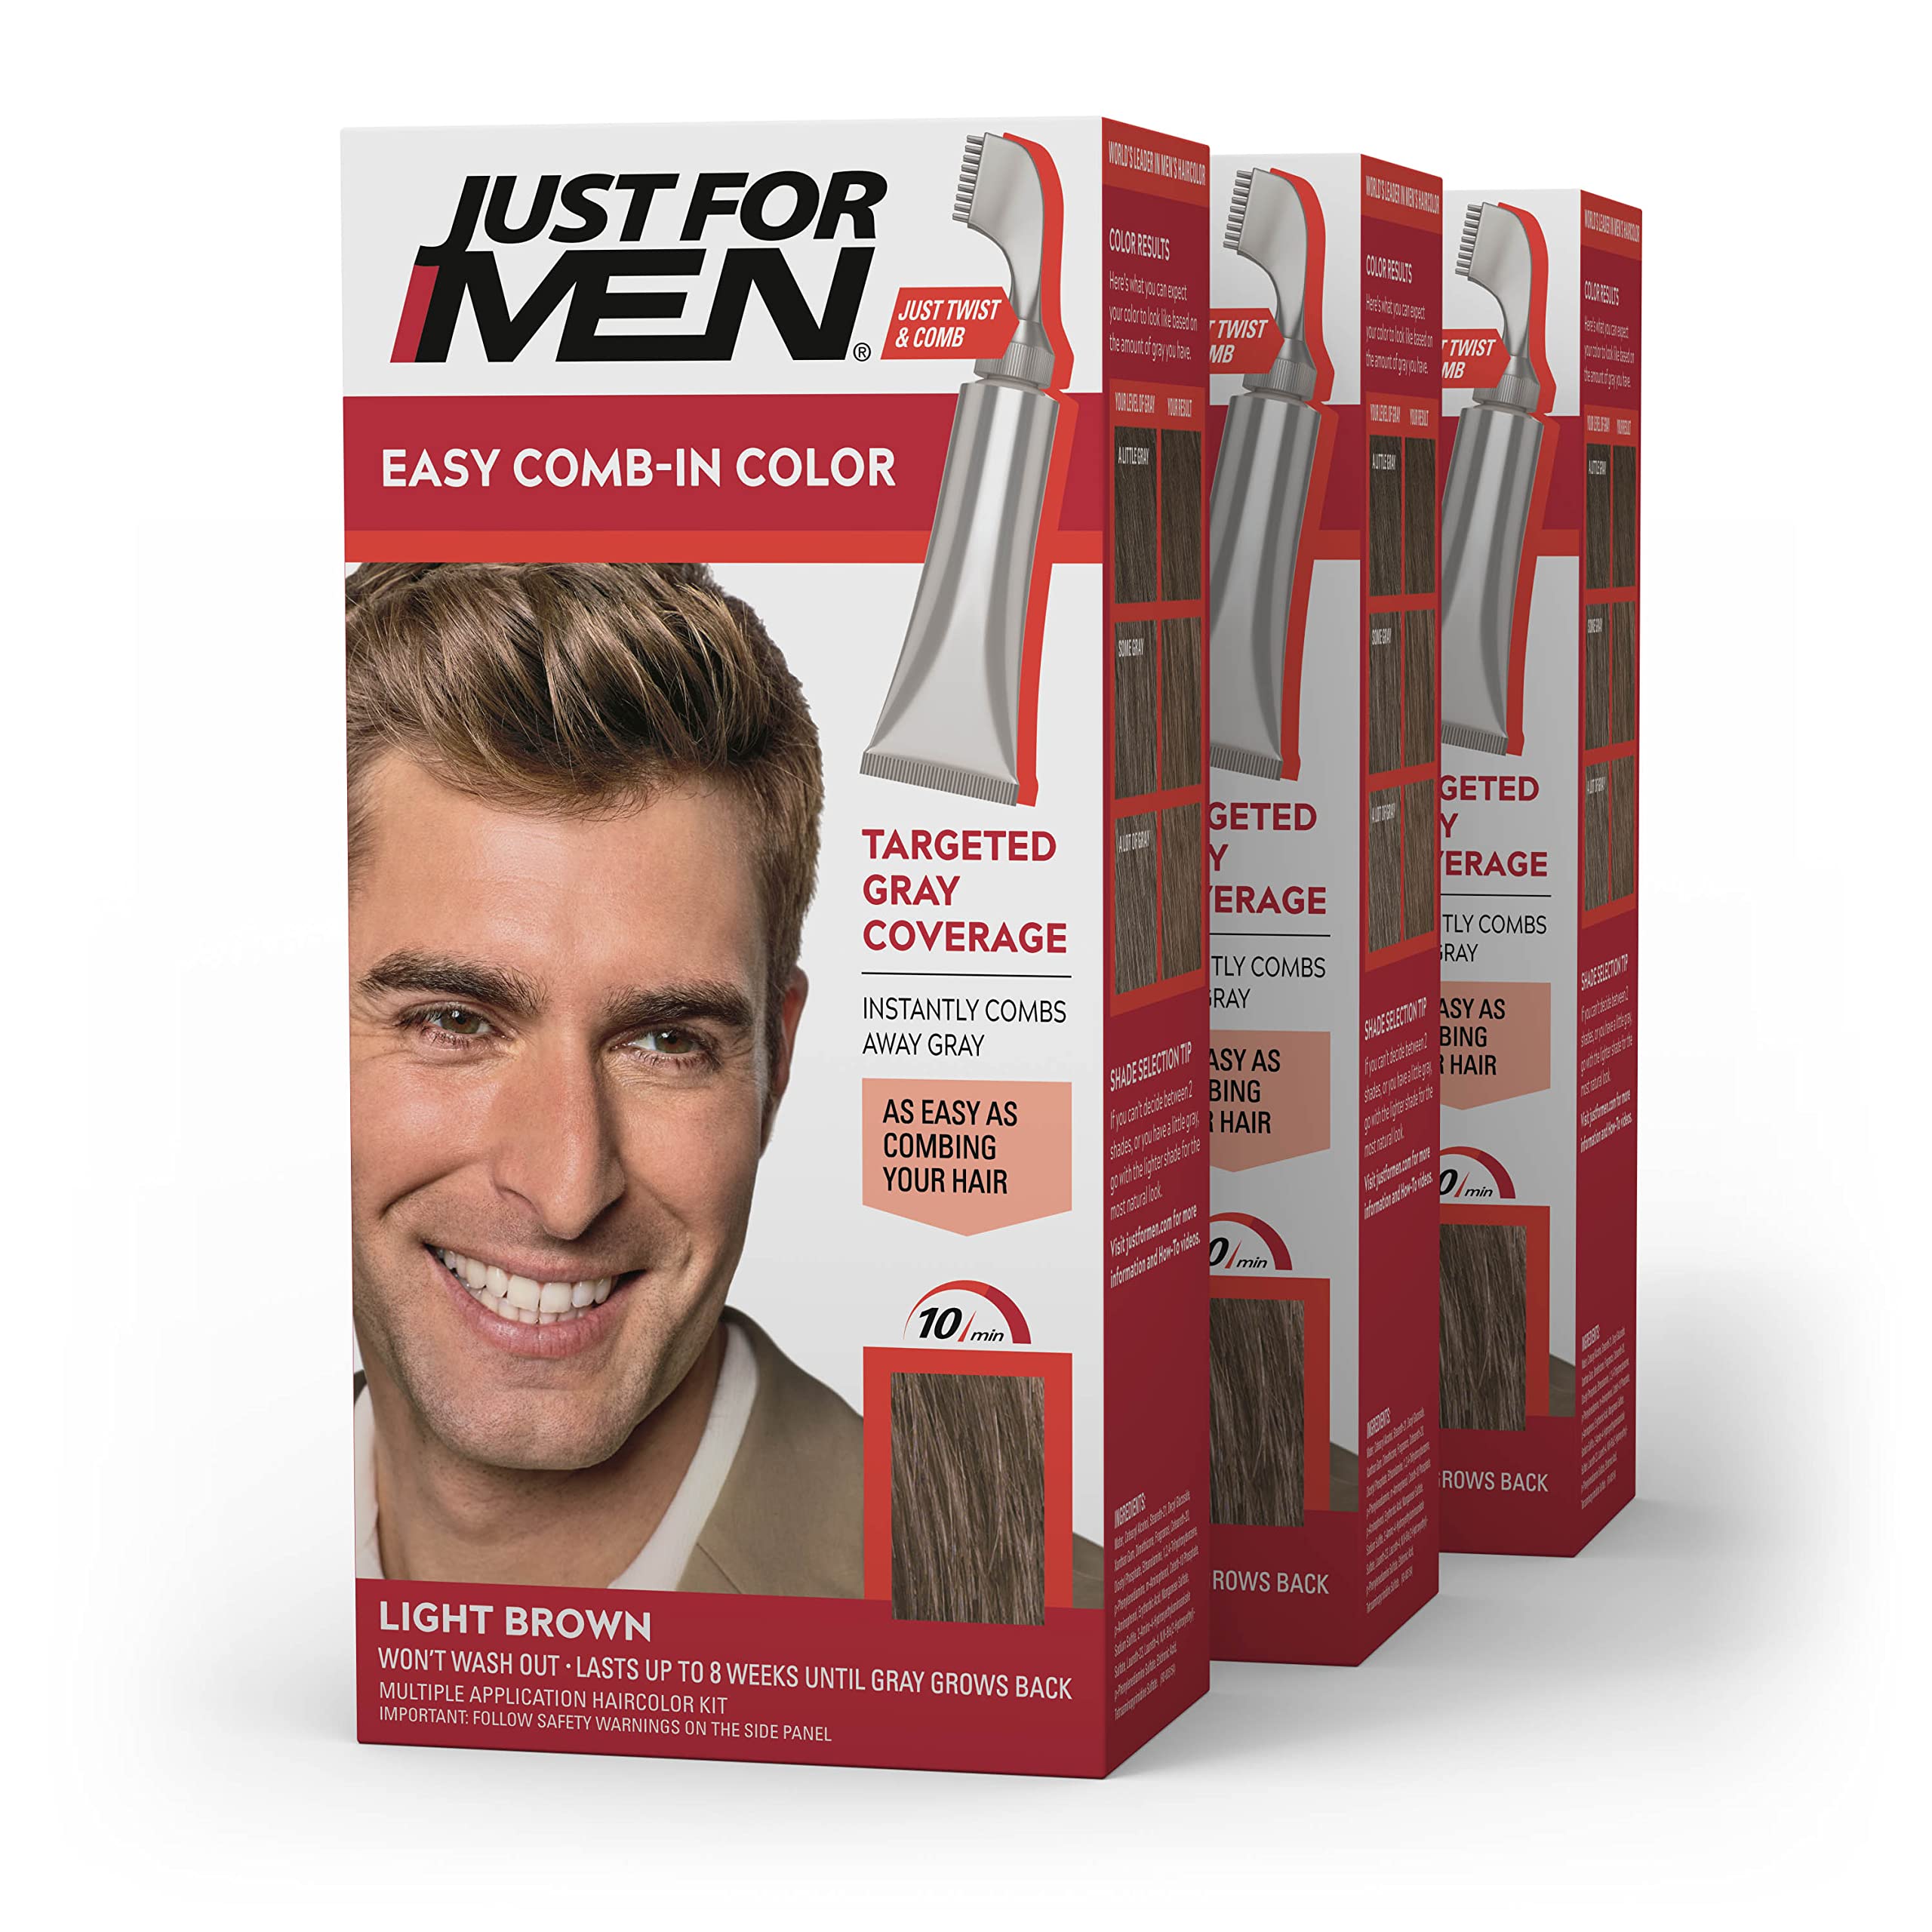 Just For Men Easy Comb-In Color Mens Hair Dye, Easy No Mix Application with Comb Applicator - Light Brown, A-25, Pack of 3